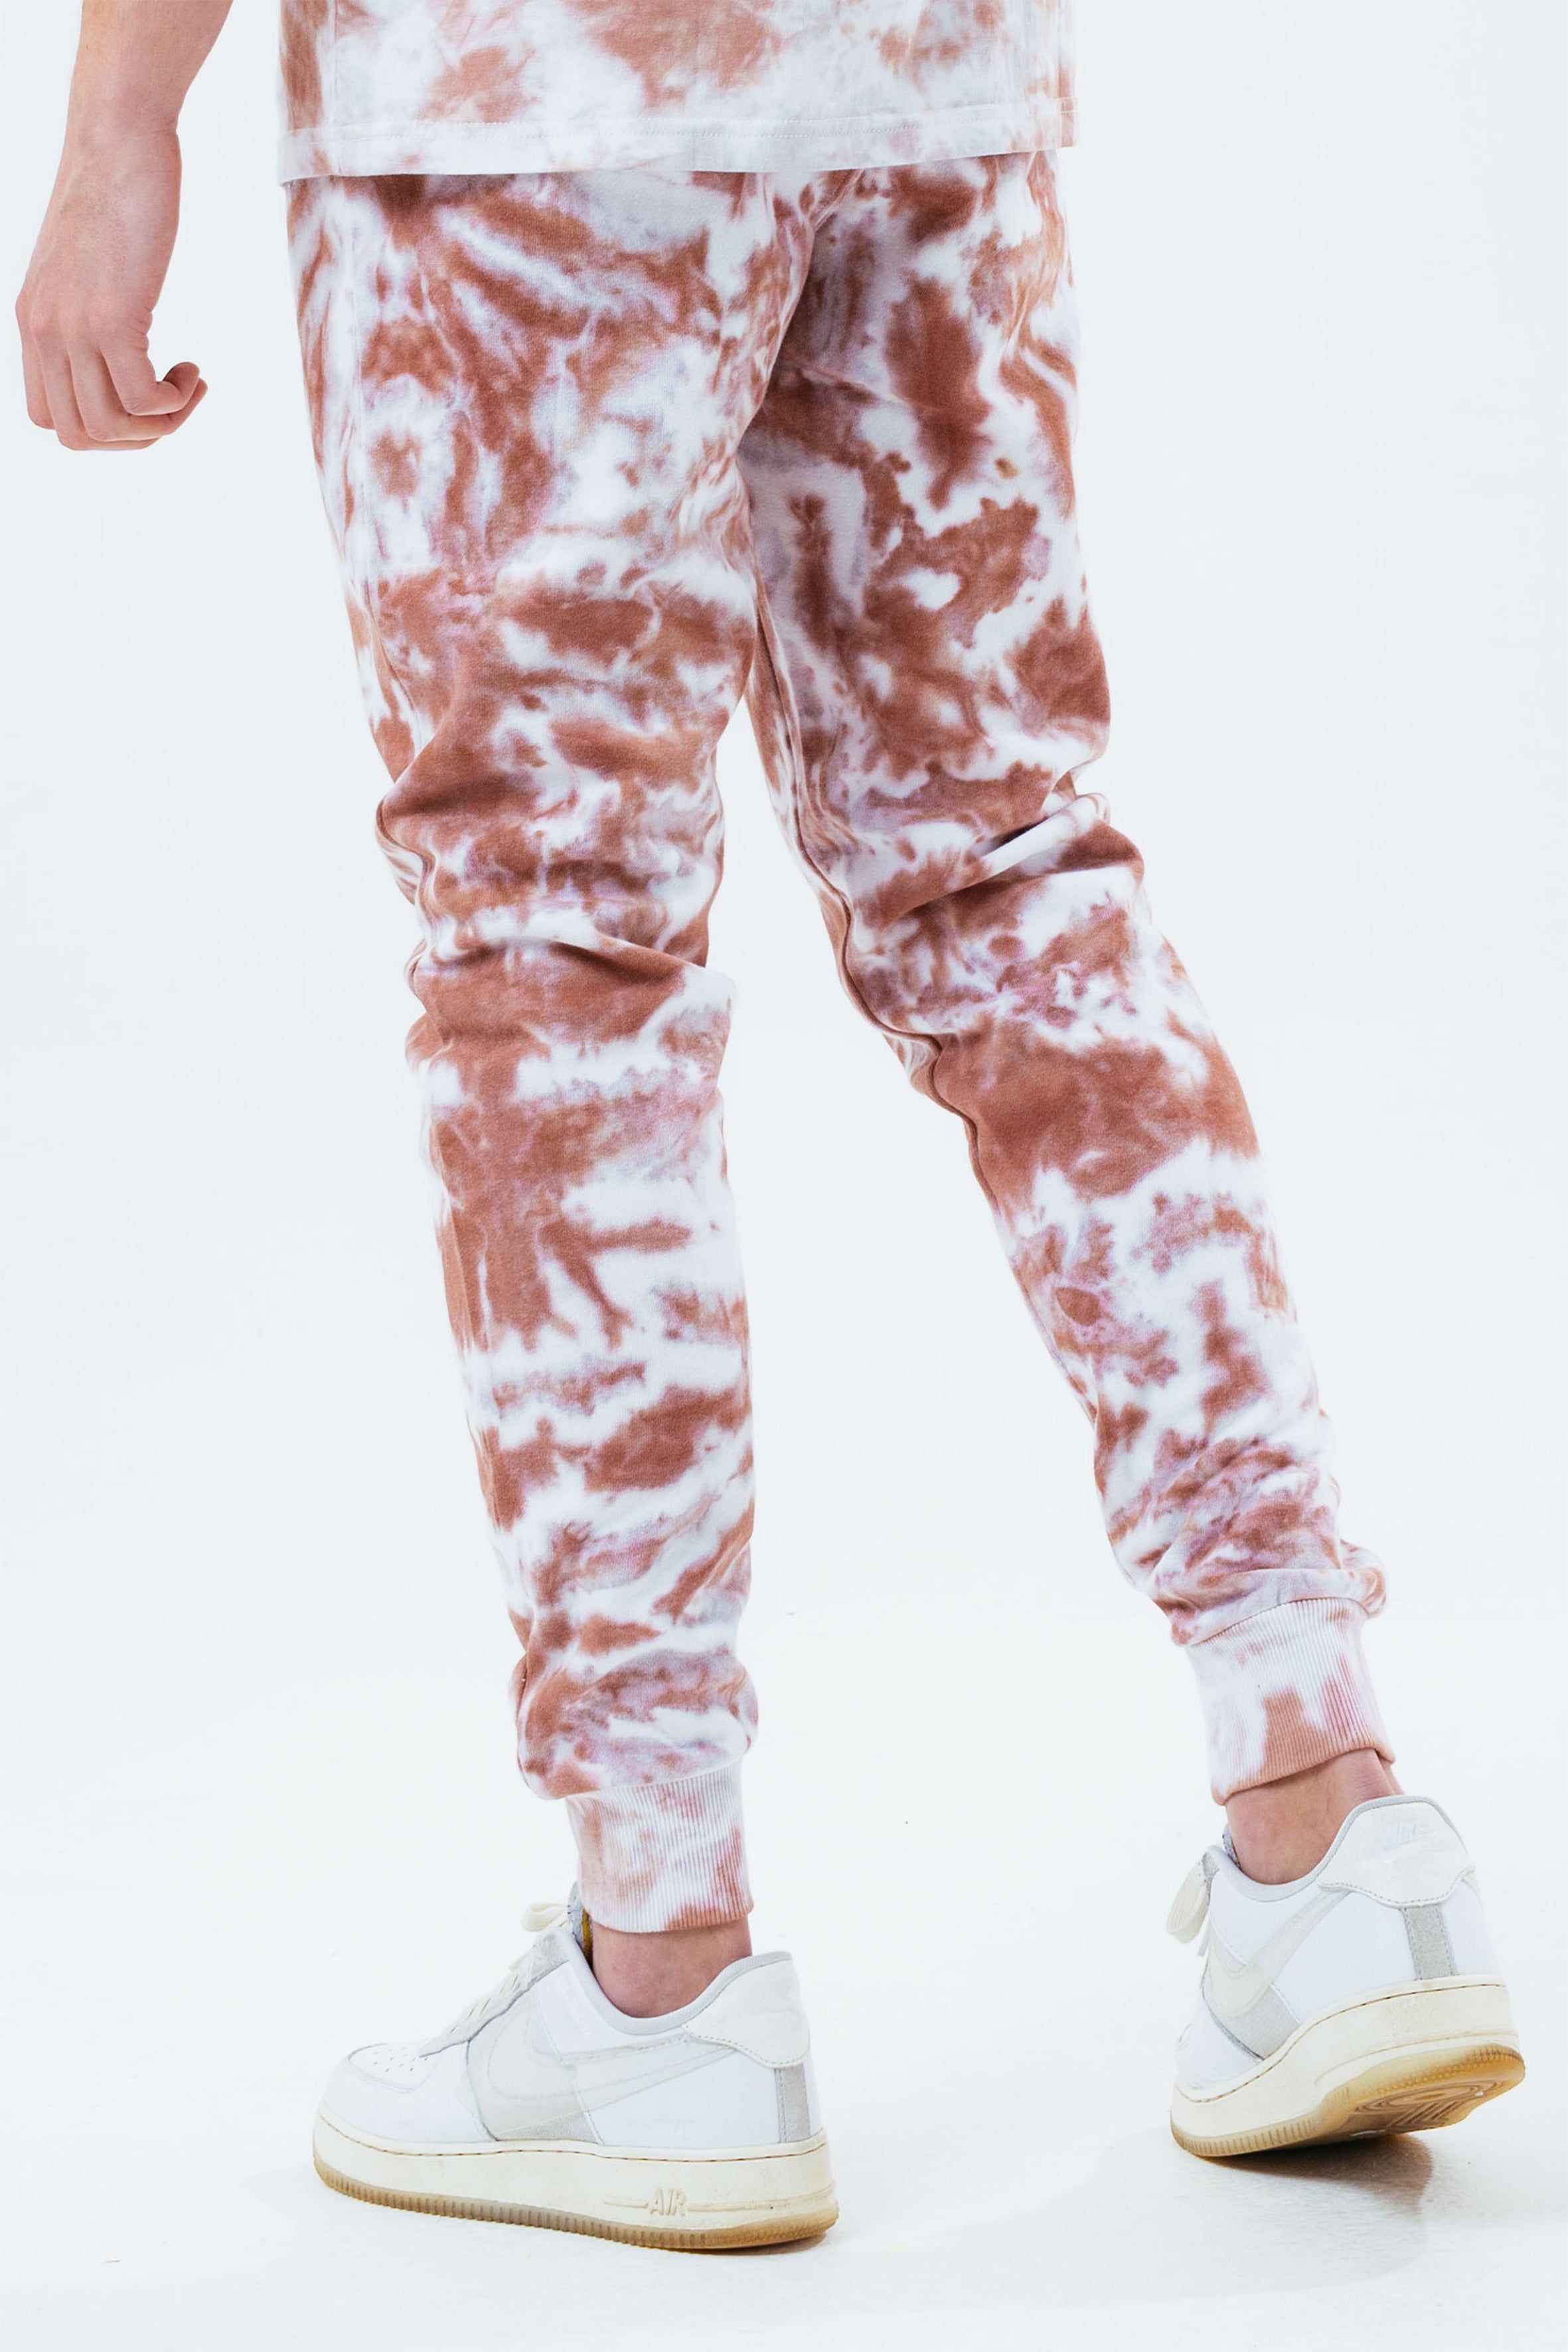 Stay on trend with the Hype Beige Tie Dye Scribble Logo Men's Joggers and grab the matching hoodie to complete the set. Designed in a soft-touch 70% Cotton 30% Polyester fabric base with the supreme amount of comfort you need from your new joggers. The design boasts an acid wash or tie-dye wash finish with an elasticated waistband, drawstring pullers and fitted cuffs. Machine wash at 30 degrees.